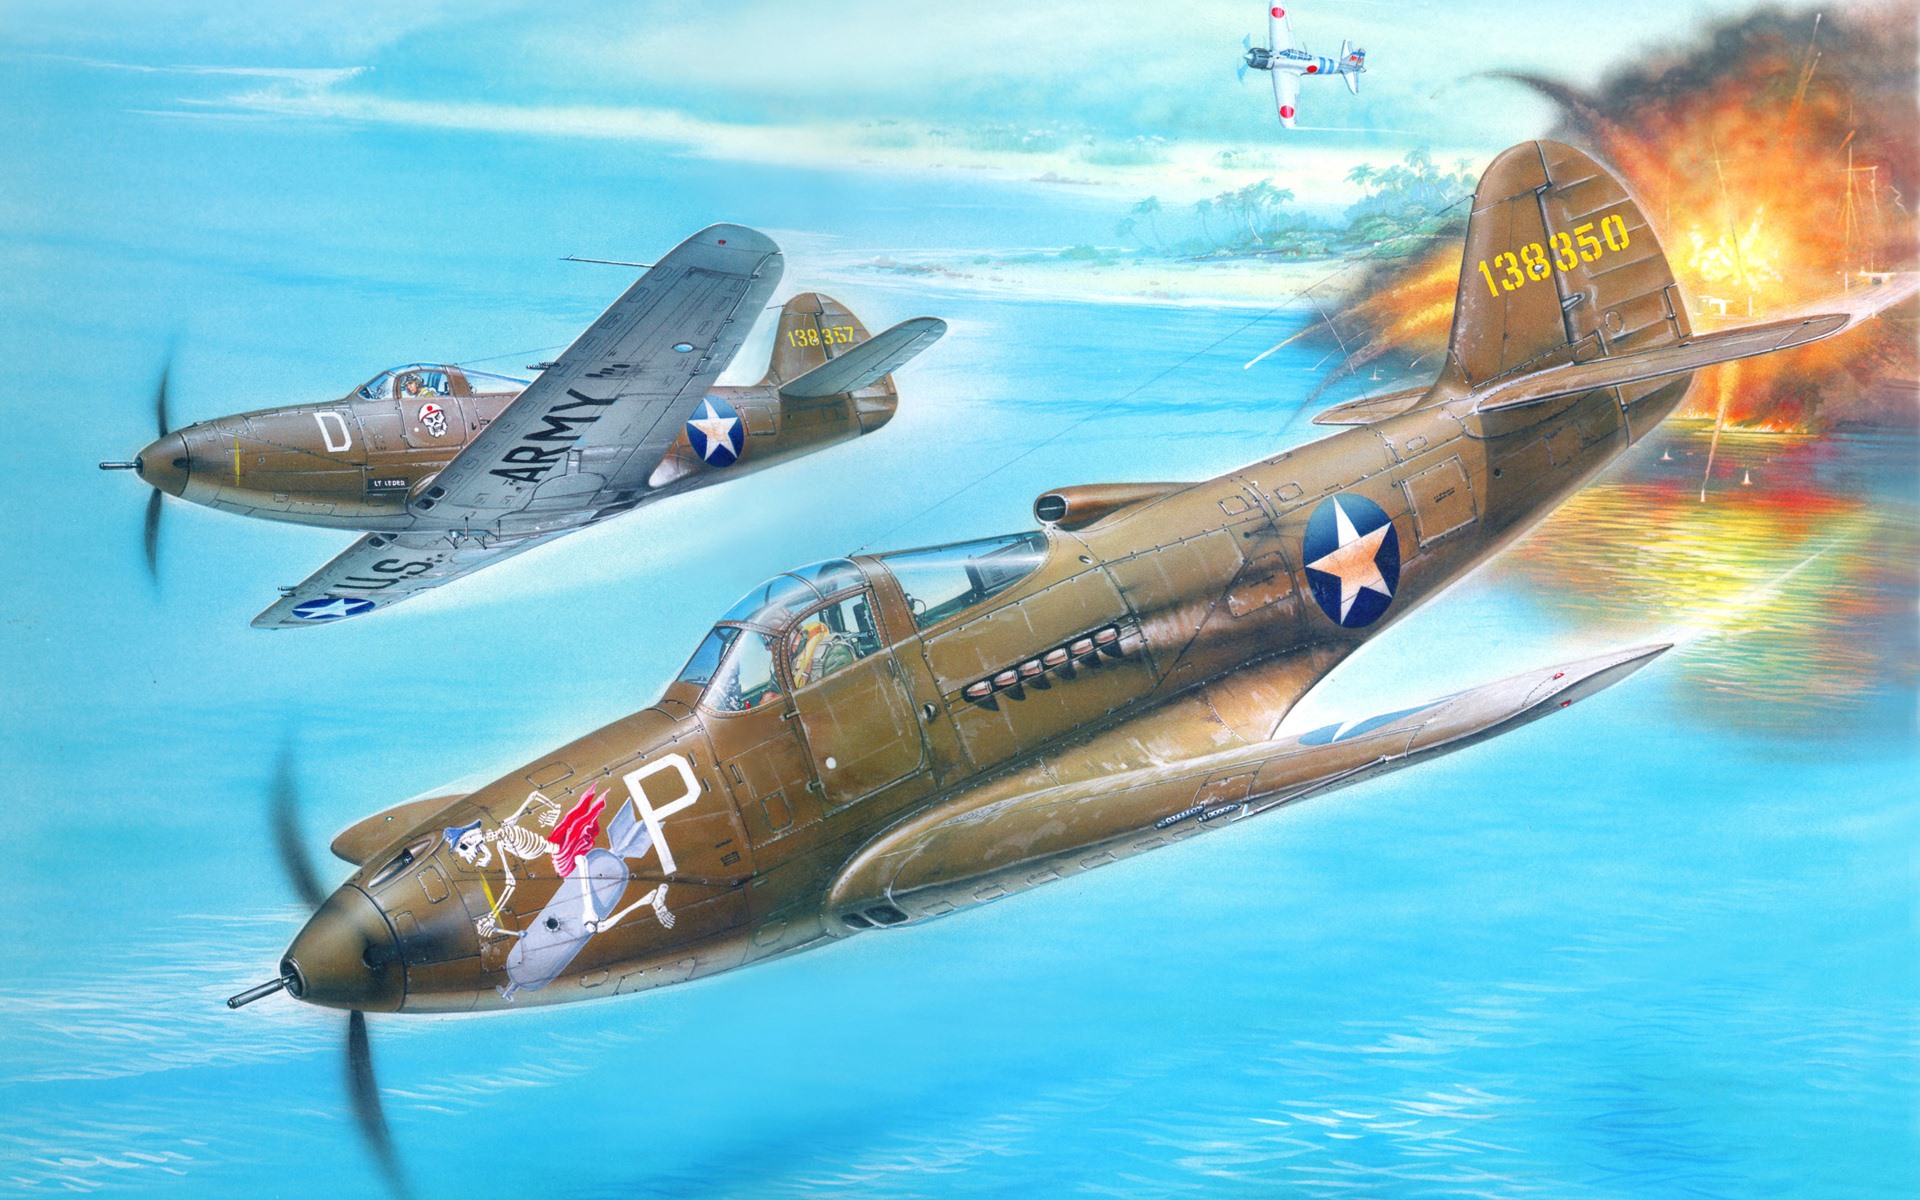 Military aircraft flight exquisite painting wallpapers #17 - 1920x1200